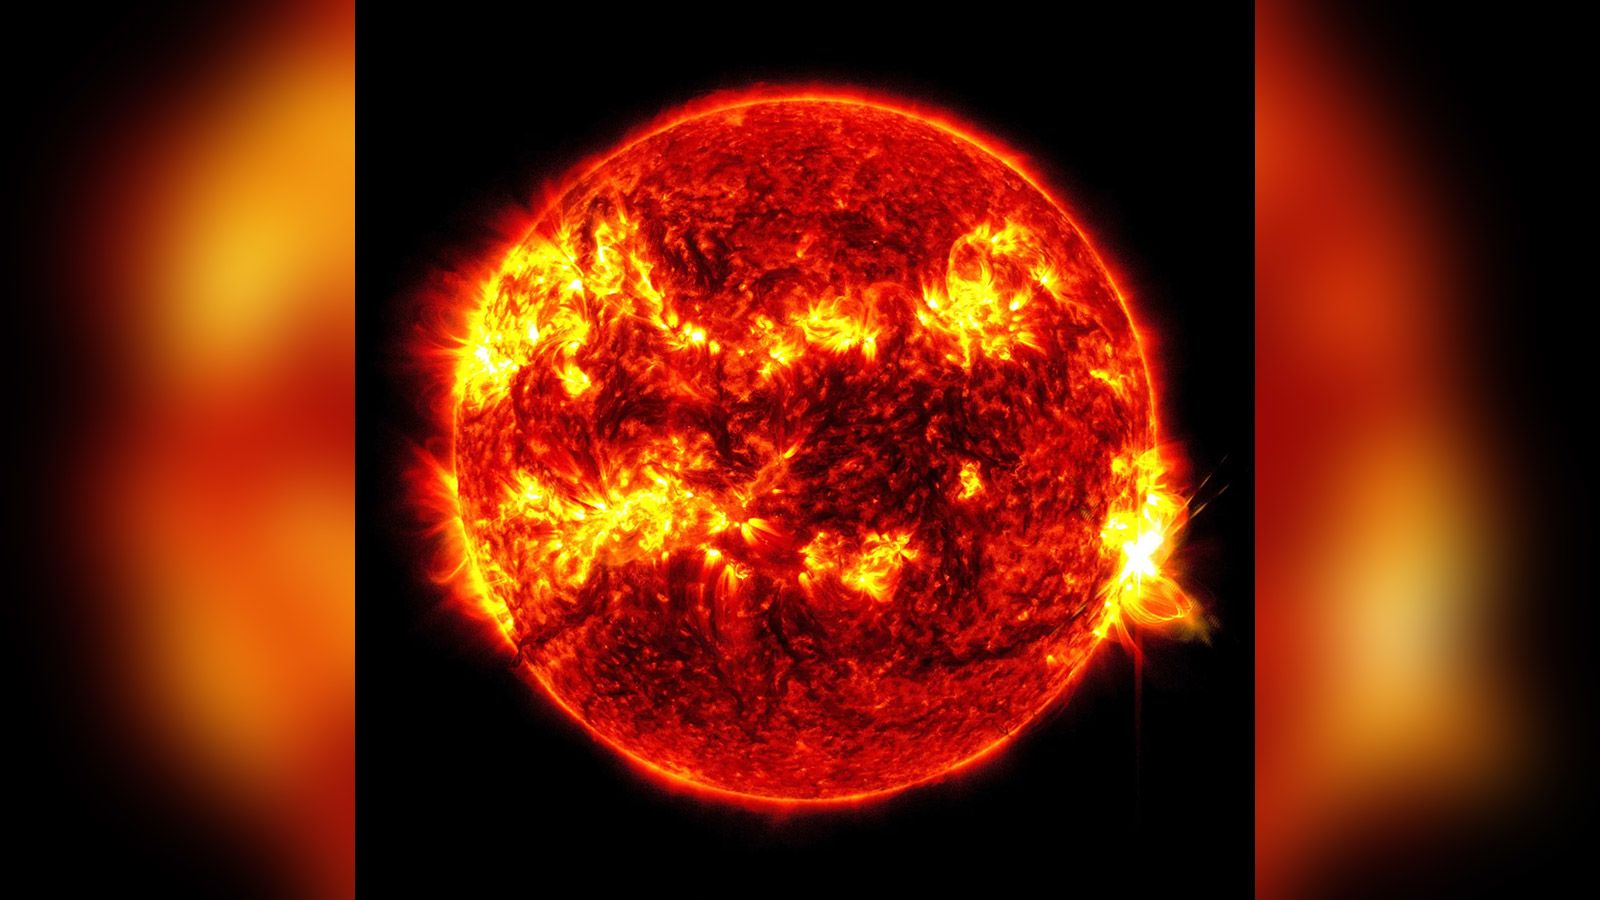 The flash of light pictured on the right side of the Sun was captured by NASA's Solar Dynamics Observatory.